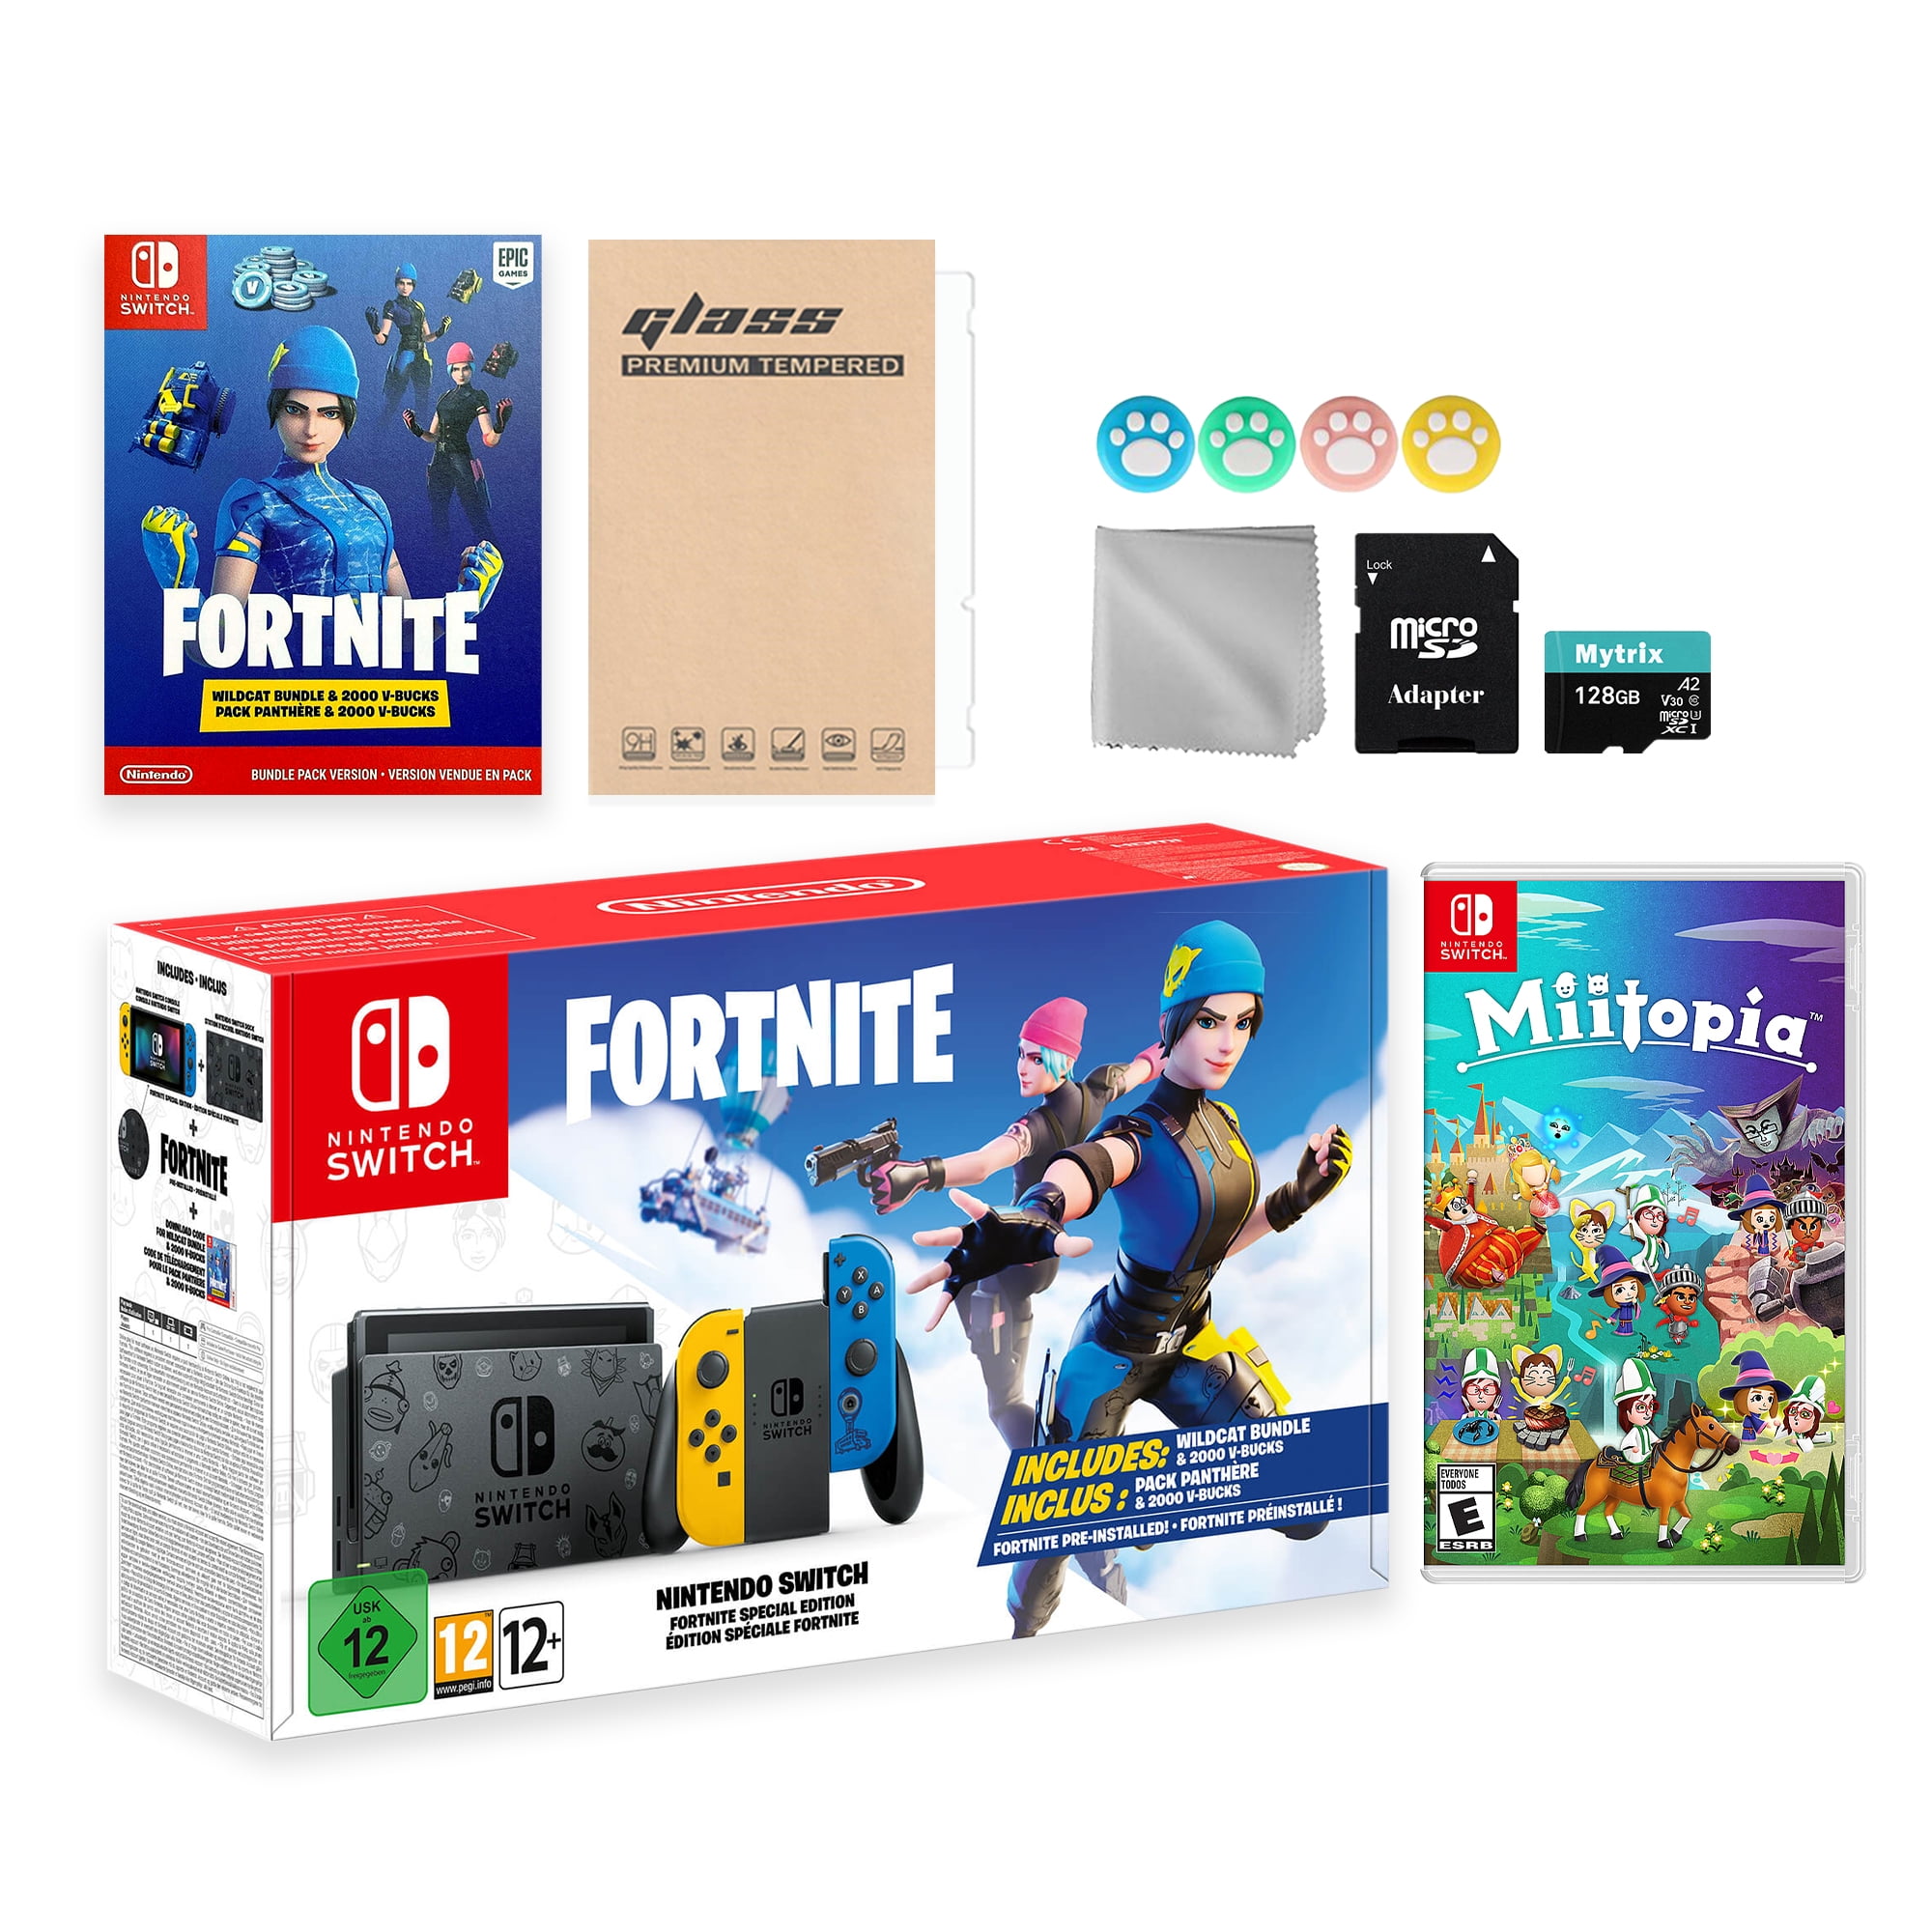 Nintendo Switch Fortnite Wildcat Limited Console Set Epic Wildcat Outfits 00 V Bucks Bundle With Miitopia And Mytrix Accessories Walmart Com